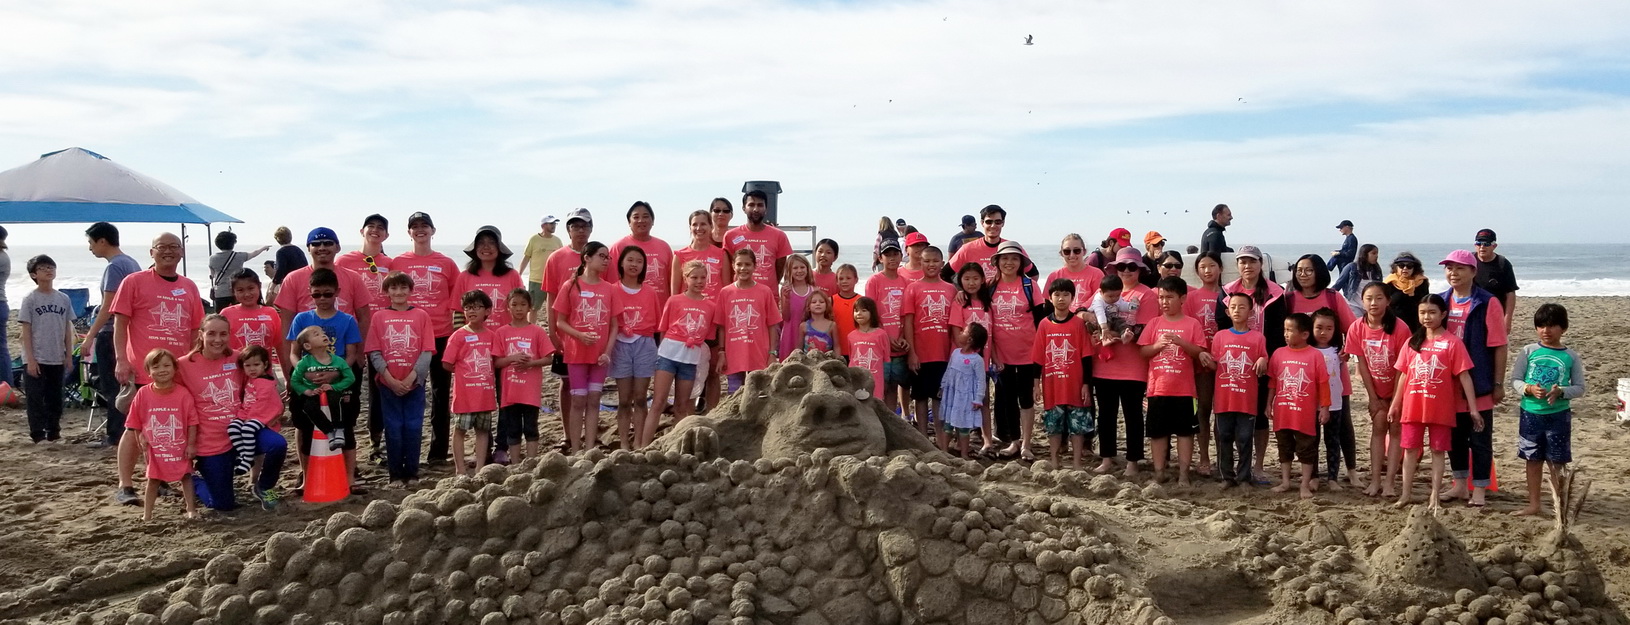 A big group of students standing in front of a sand castle at Ocean Beach